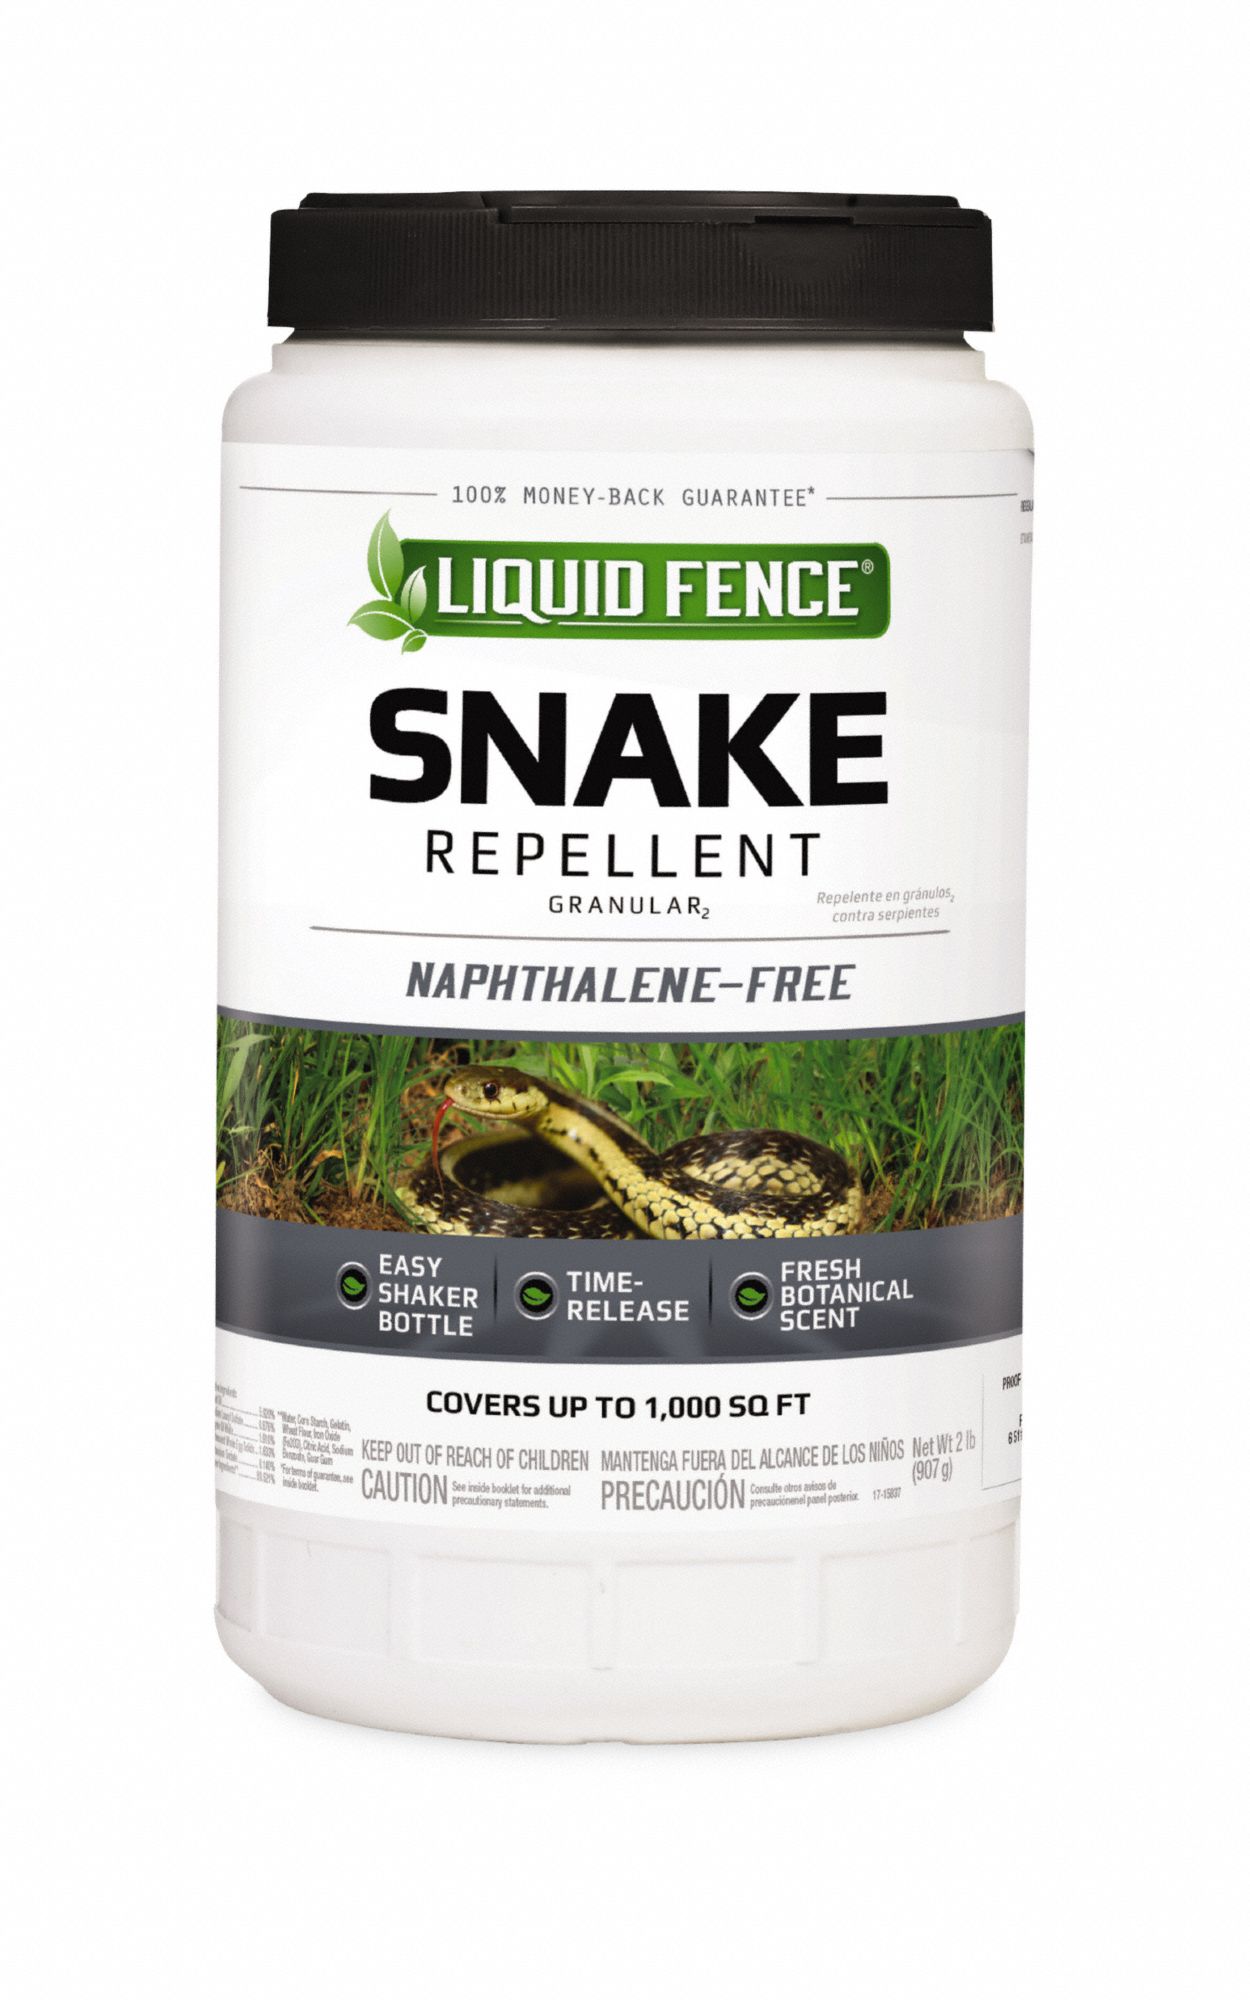 Animal Repellent: Snakes